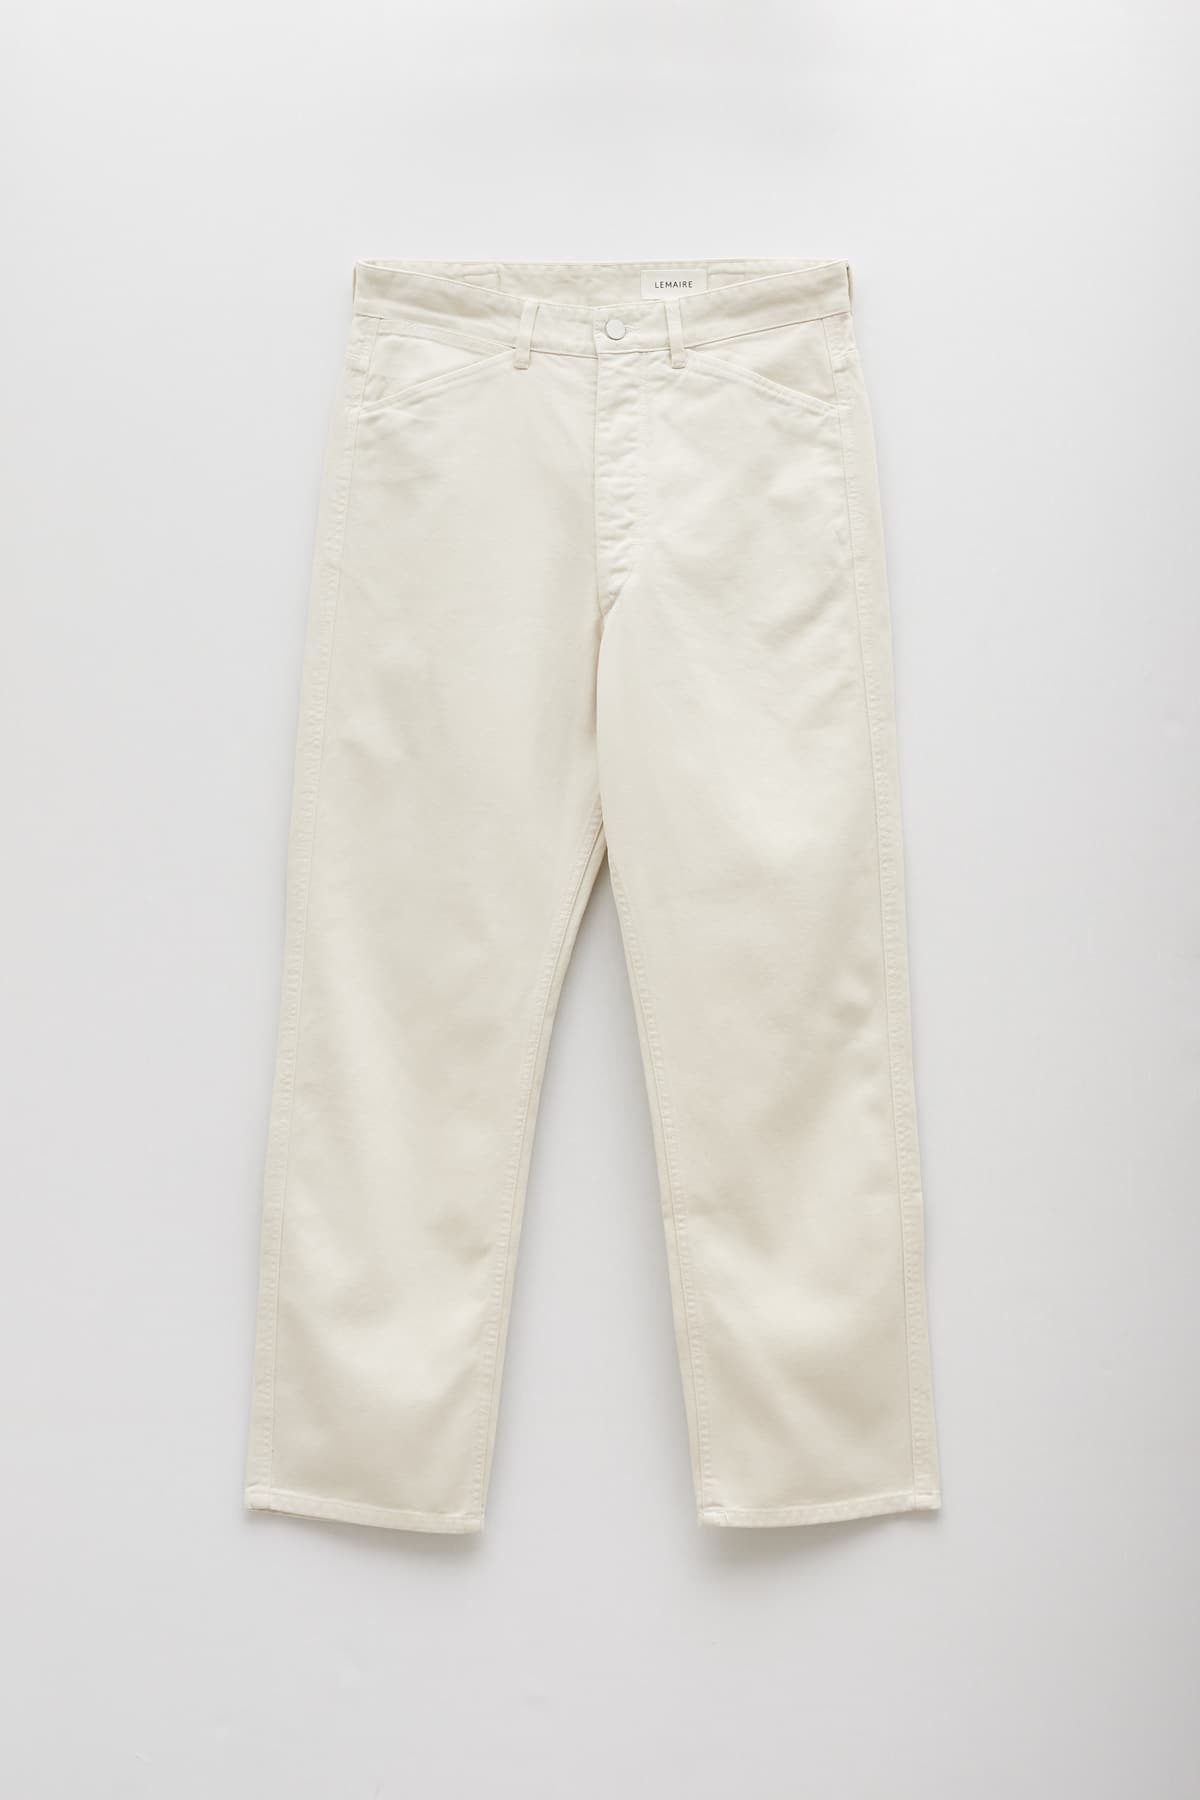 LEMAIRE CLAY WHITE CURVED 5 POCKETS PANTS IAMNUE